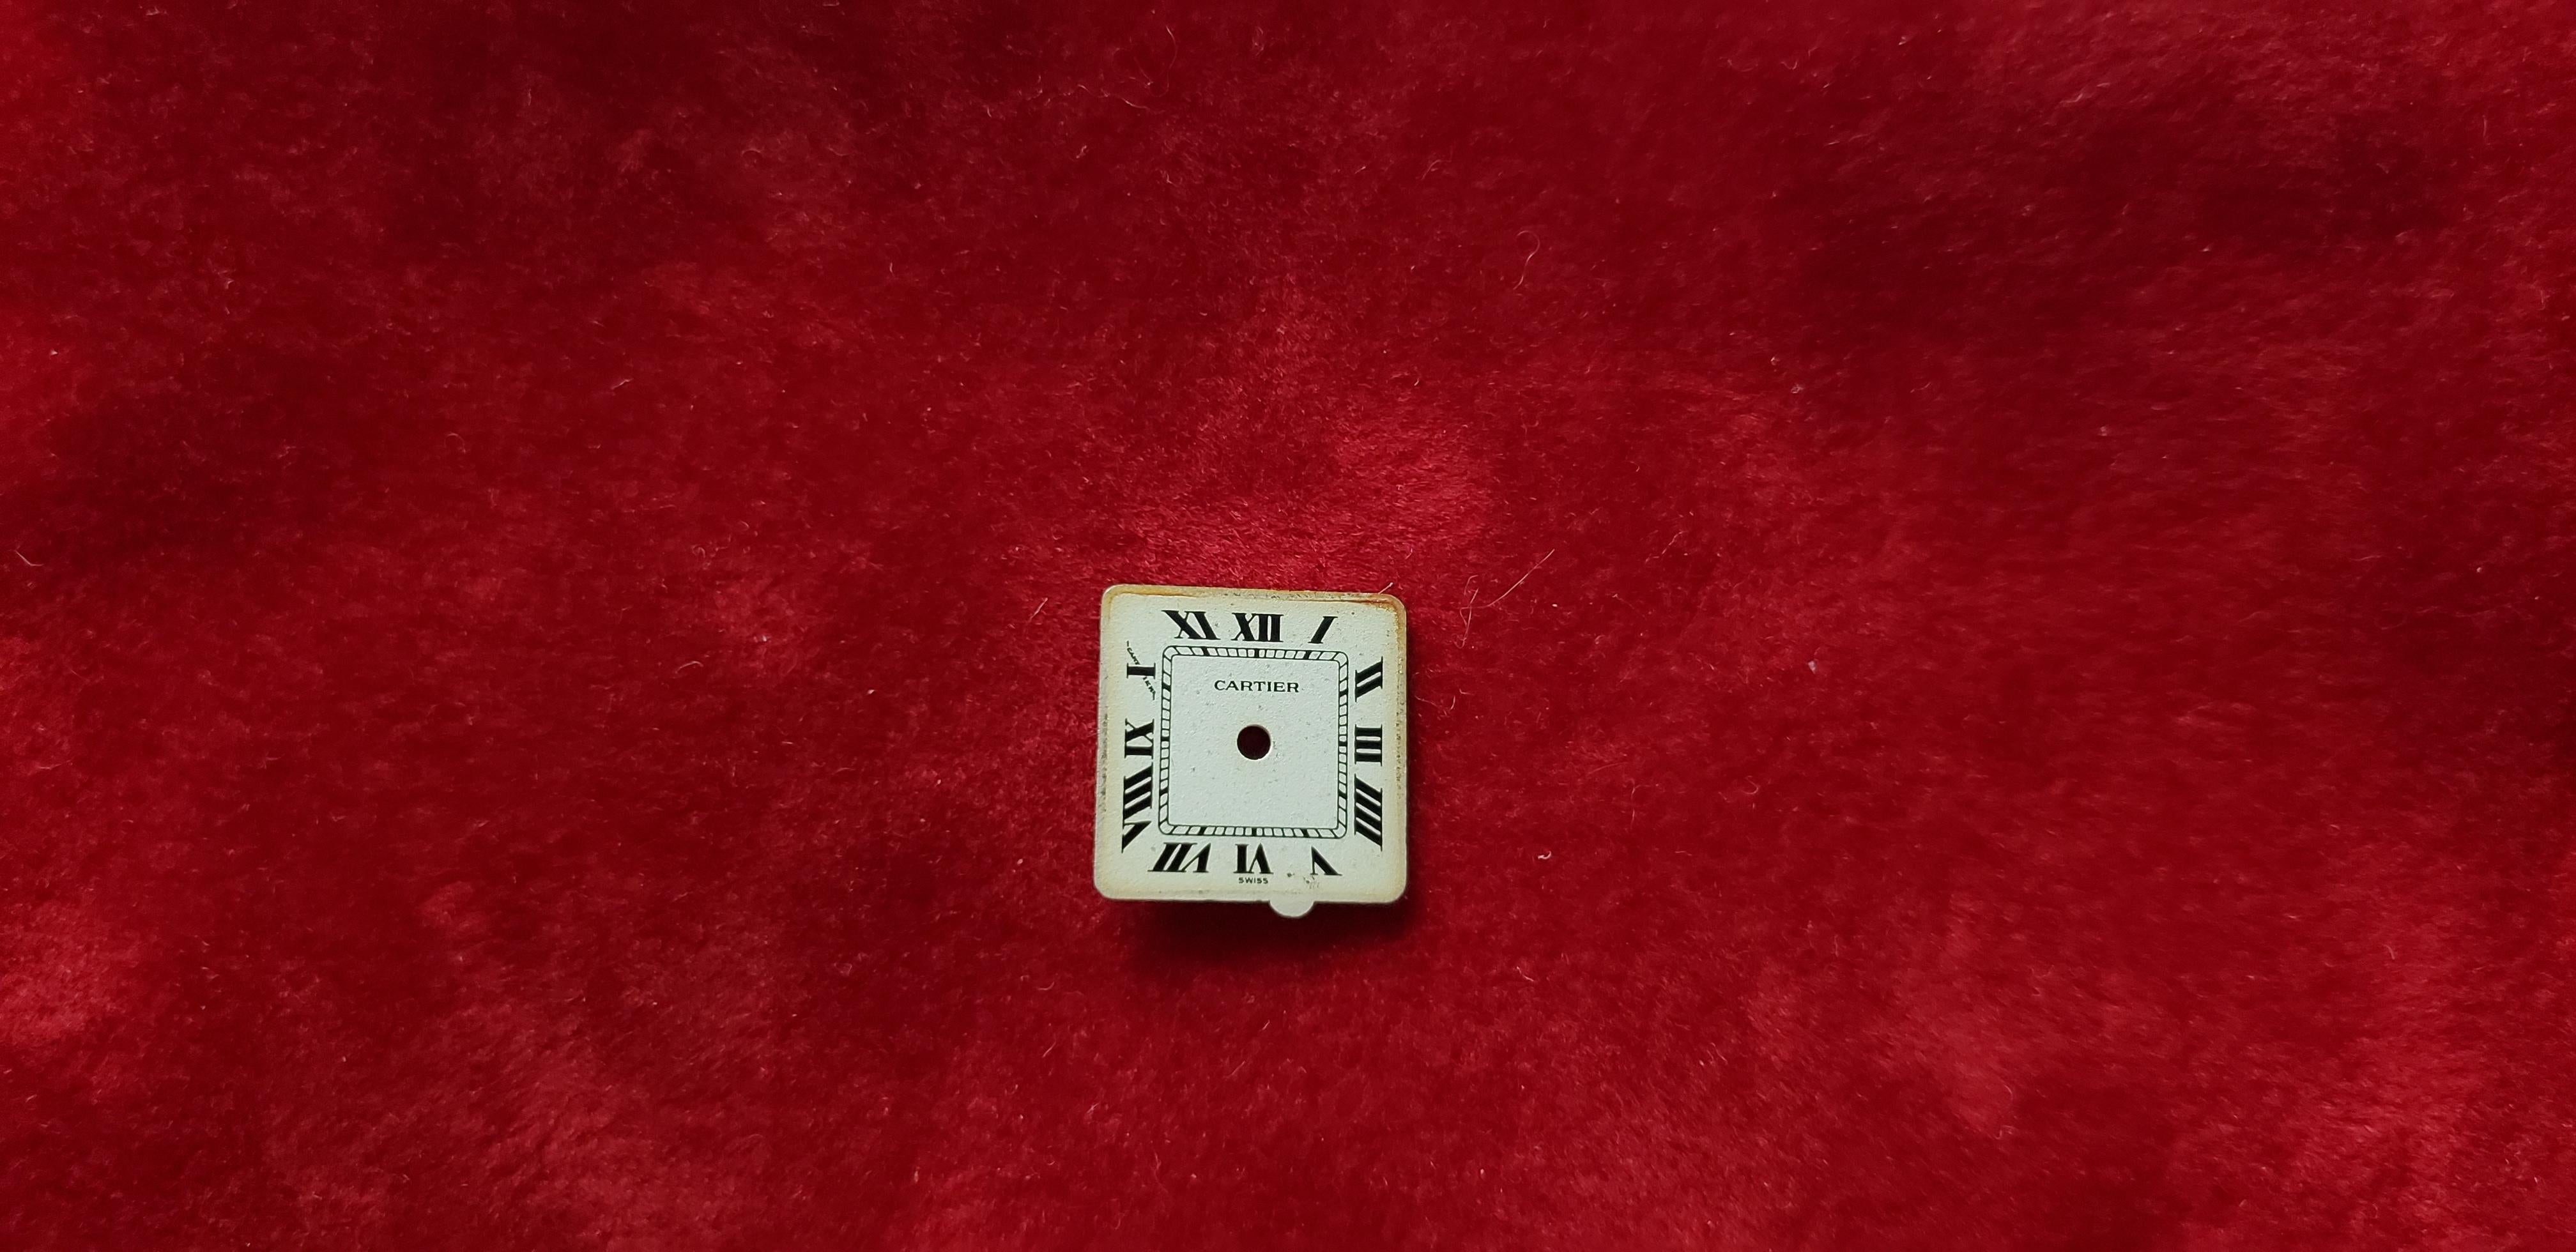 Authentic Genuine Original Cartier Face Dial White/Off White Dial In Excellent Condition For Sale In Sugar Land, TX